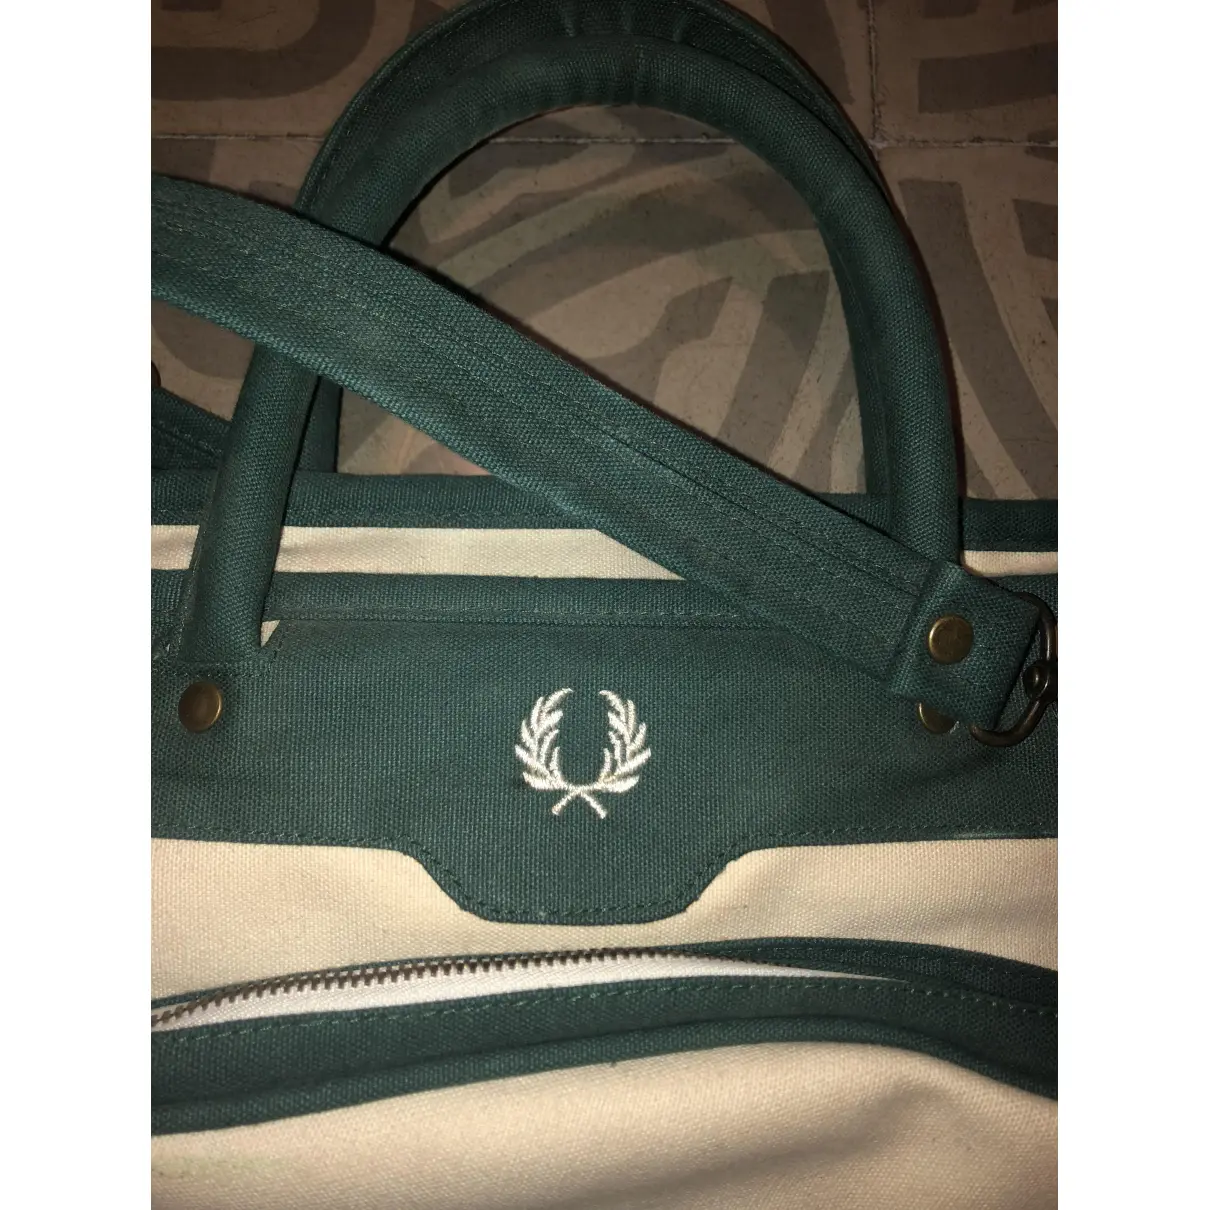 Buy Fred Perry Bag online